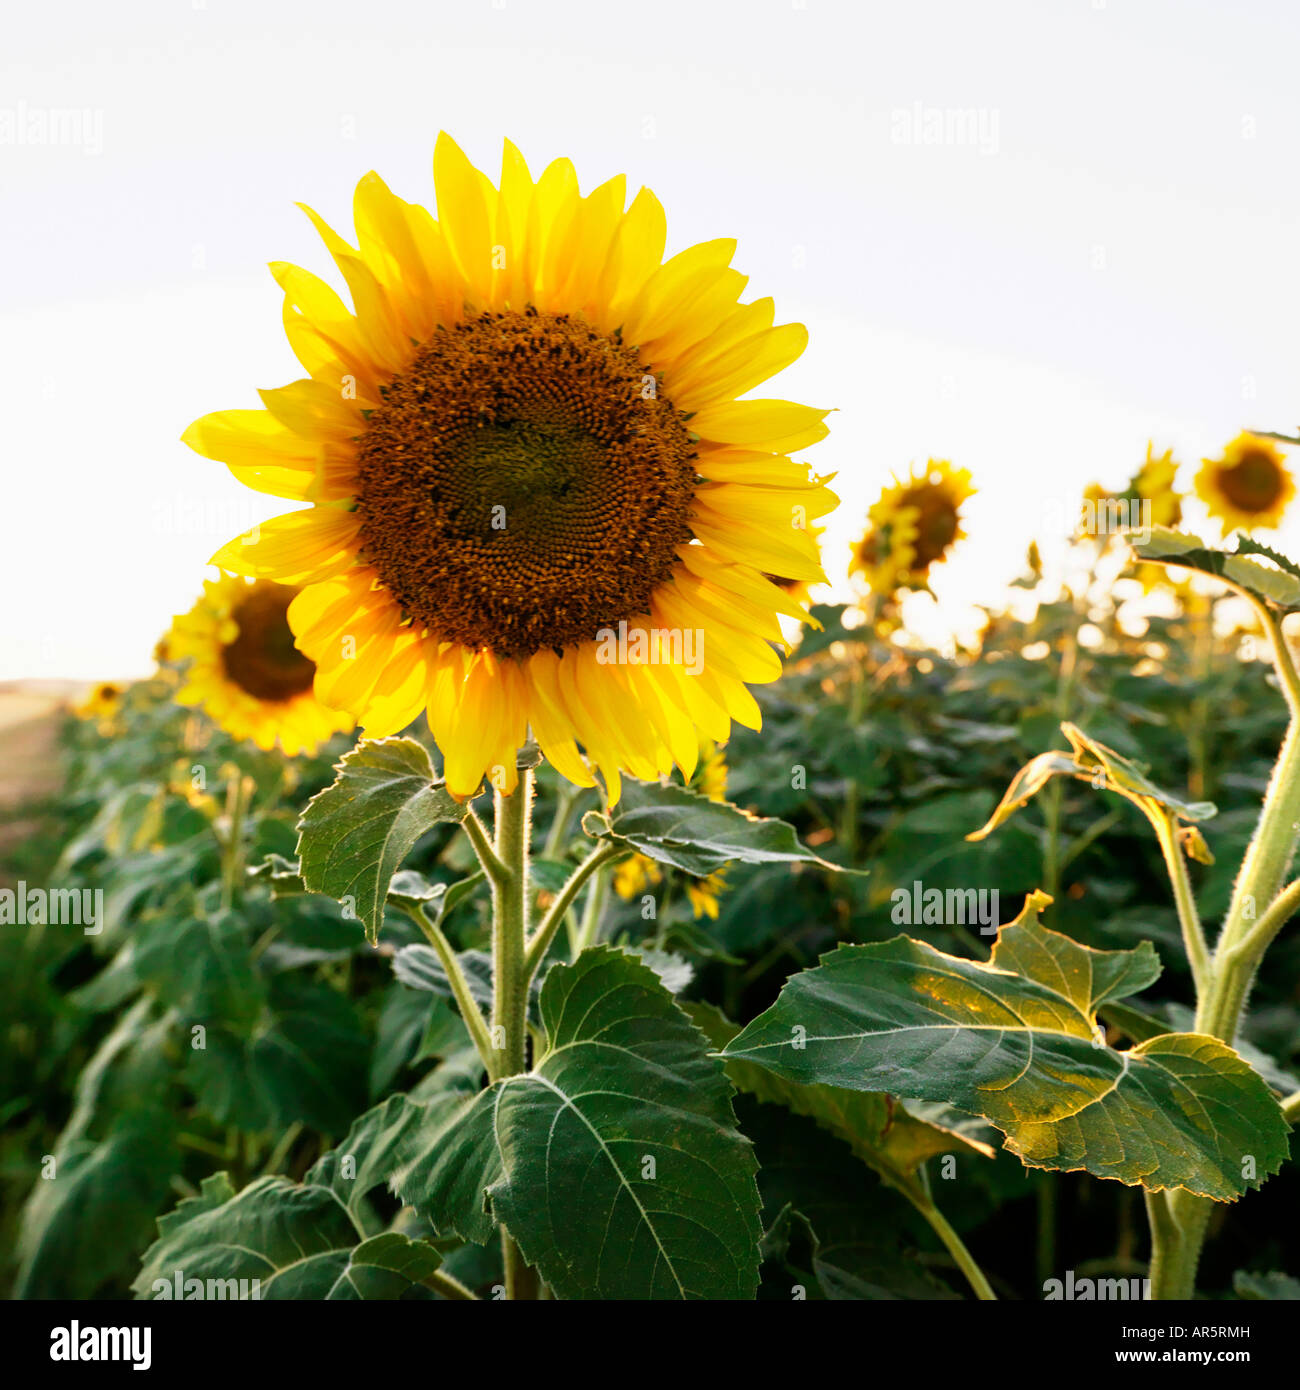 Close up of sunflower growing in field of sunflowers Stock Photo